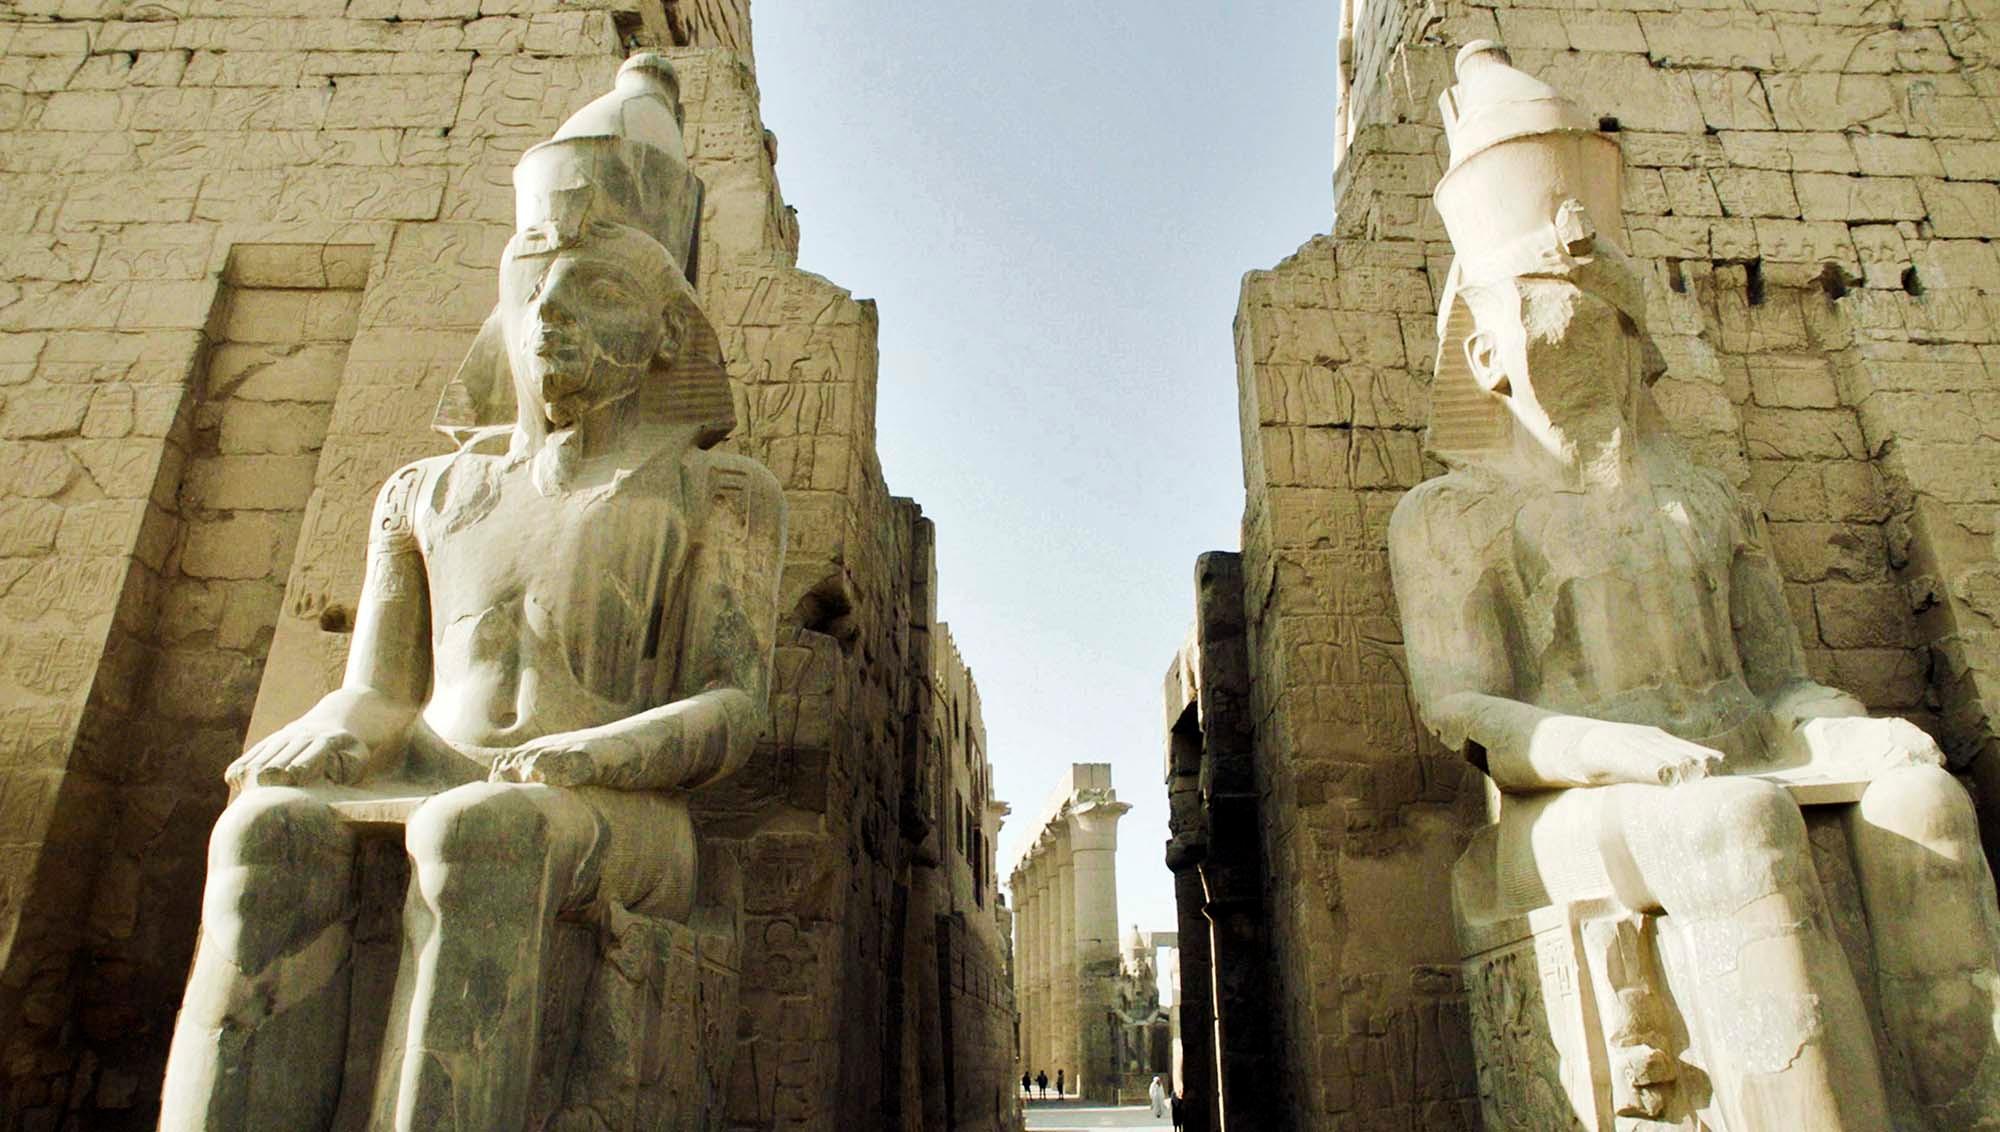 Luxor Temple (C. 1200 BCE) - Thebes, Egypt